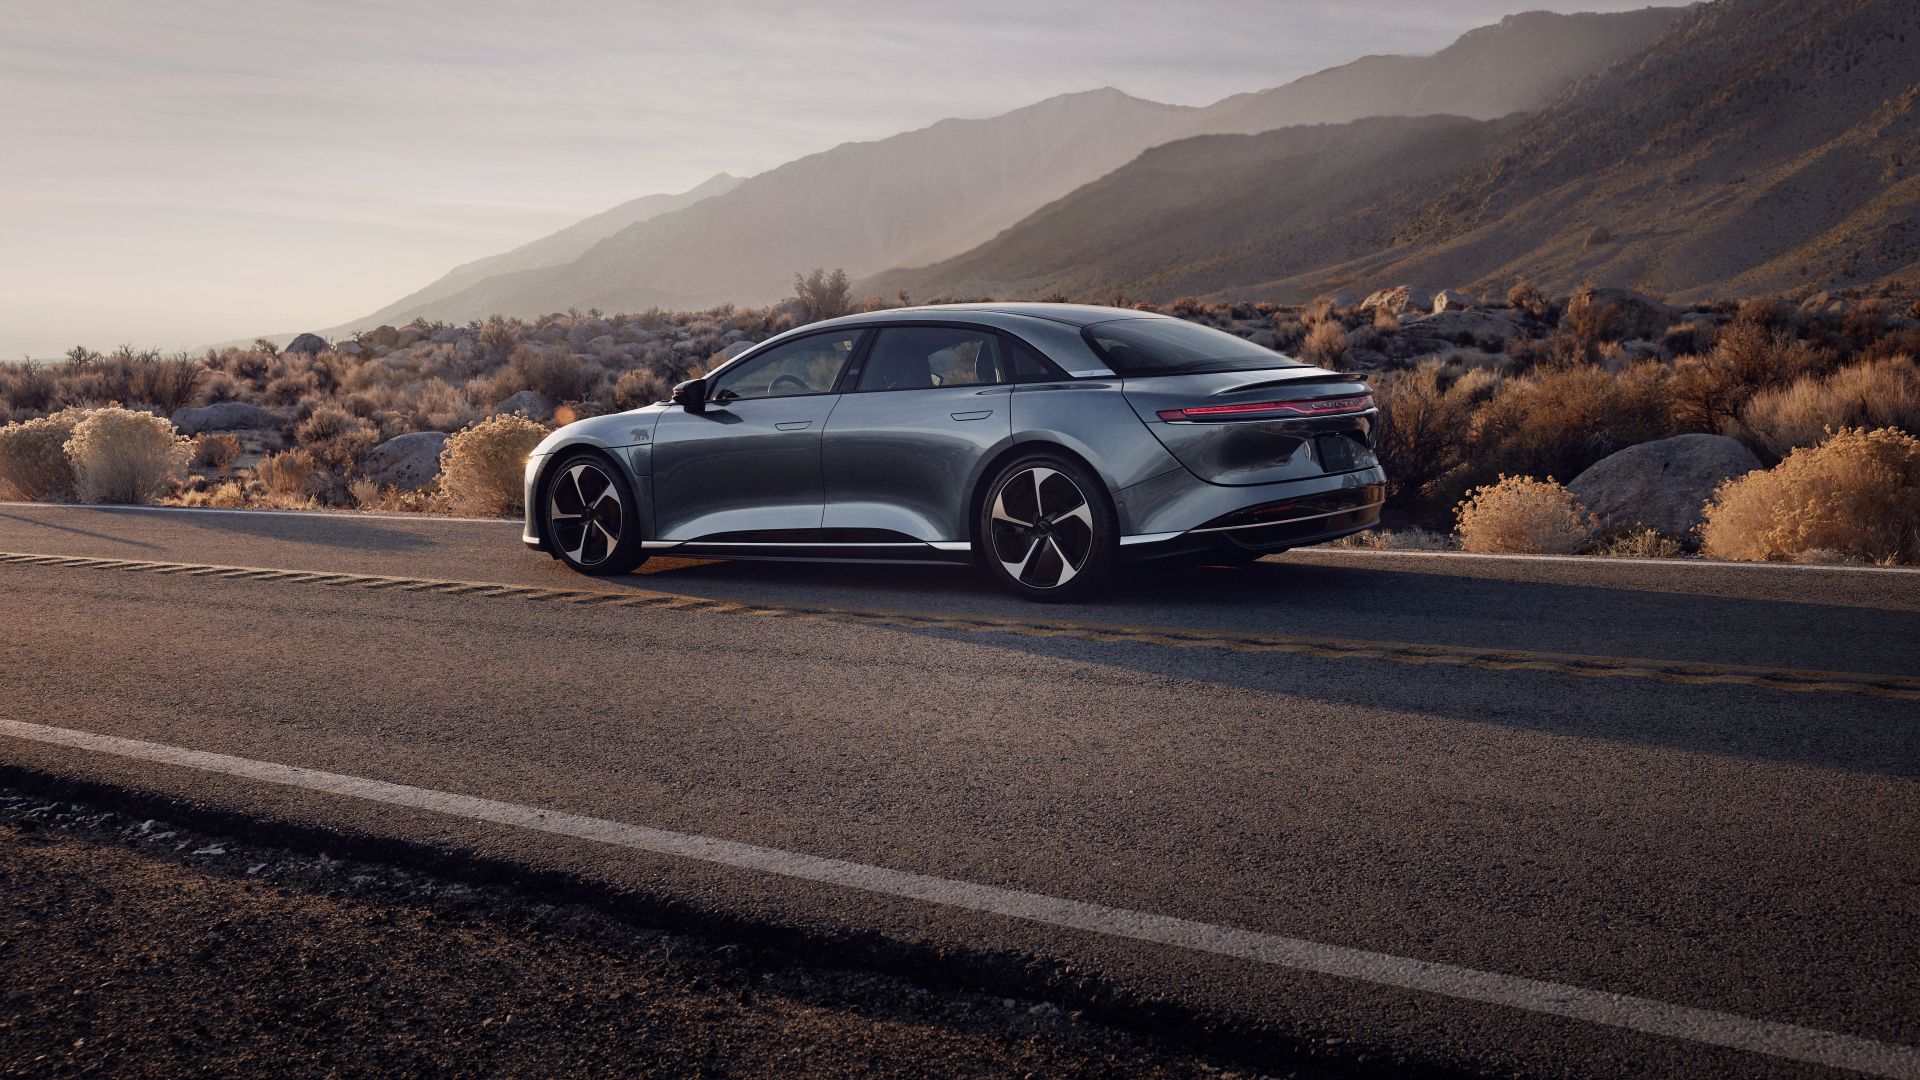 Why The Lucid Air Is Better Than The Tesla Model S